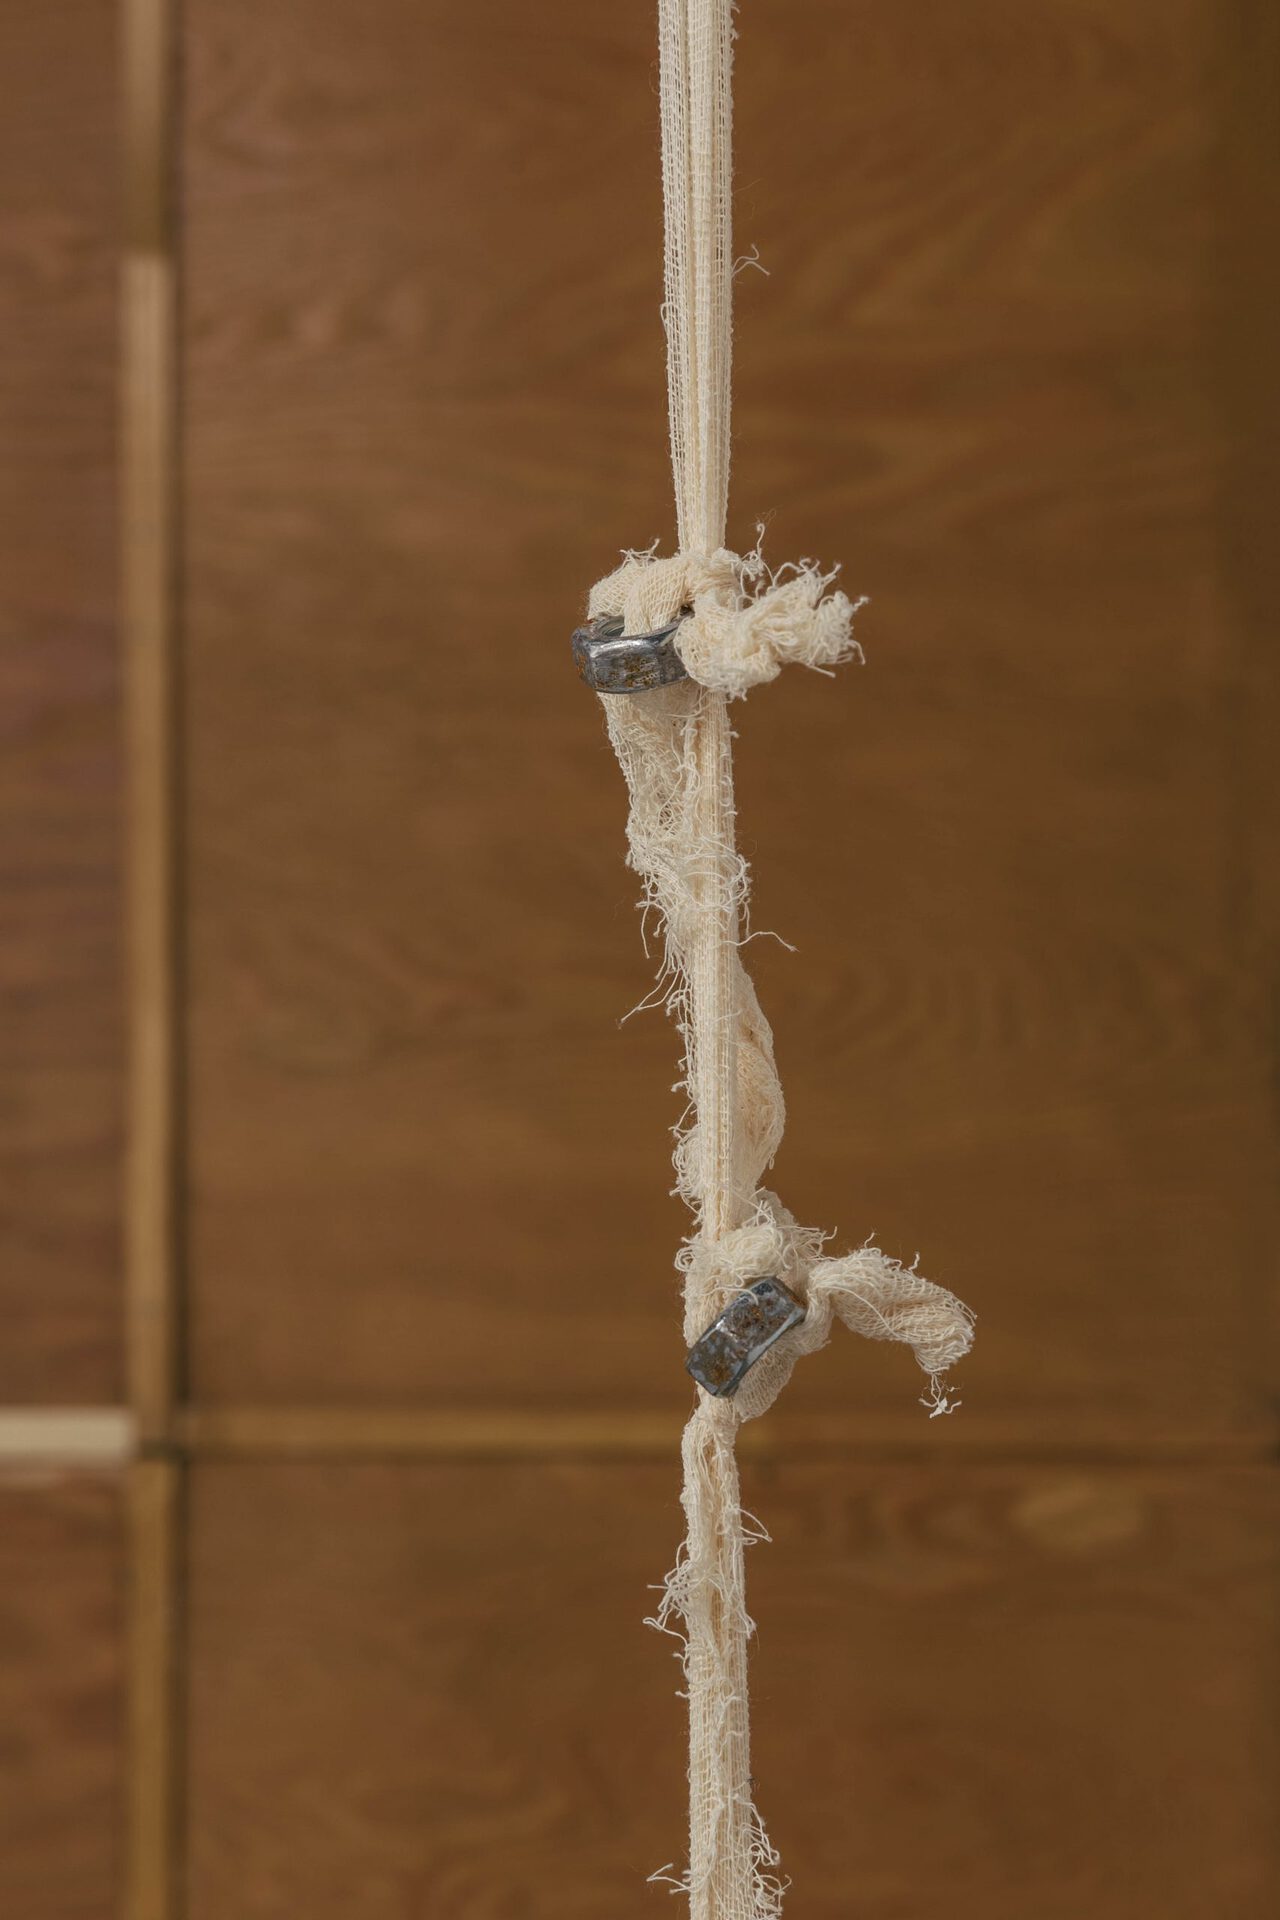 Hanged 2. 2021, hypoallergenic silicone, drawing, cheesecloth, rust, screw-nuts, ground, oil traces looped sound 06’54” 22.5х18х1 сm